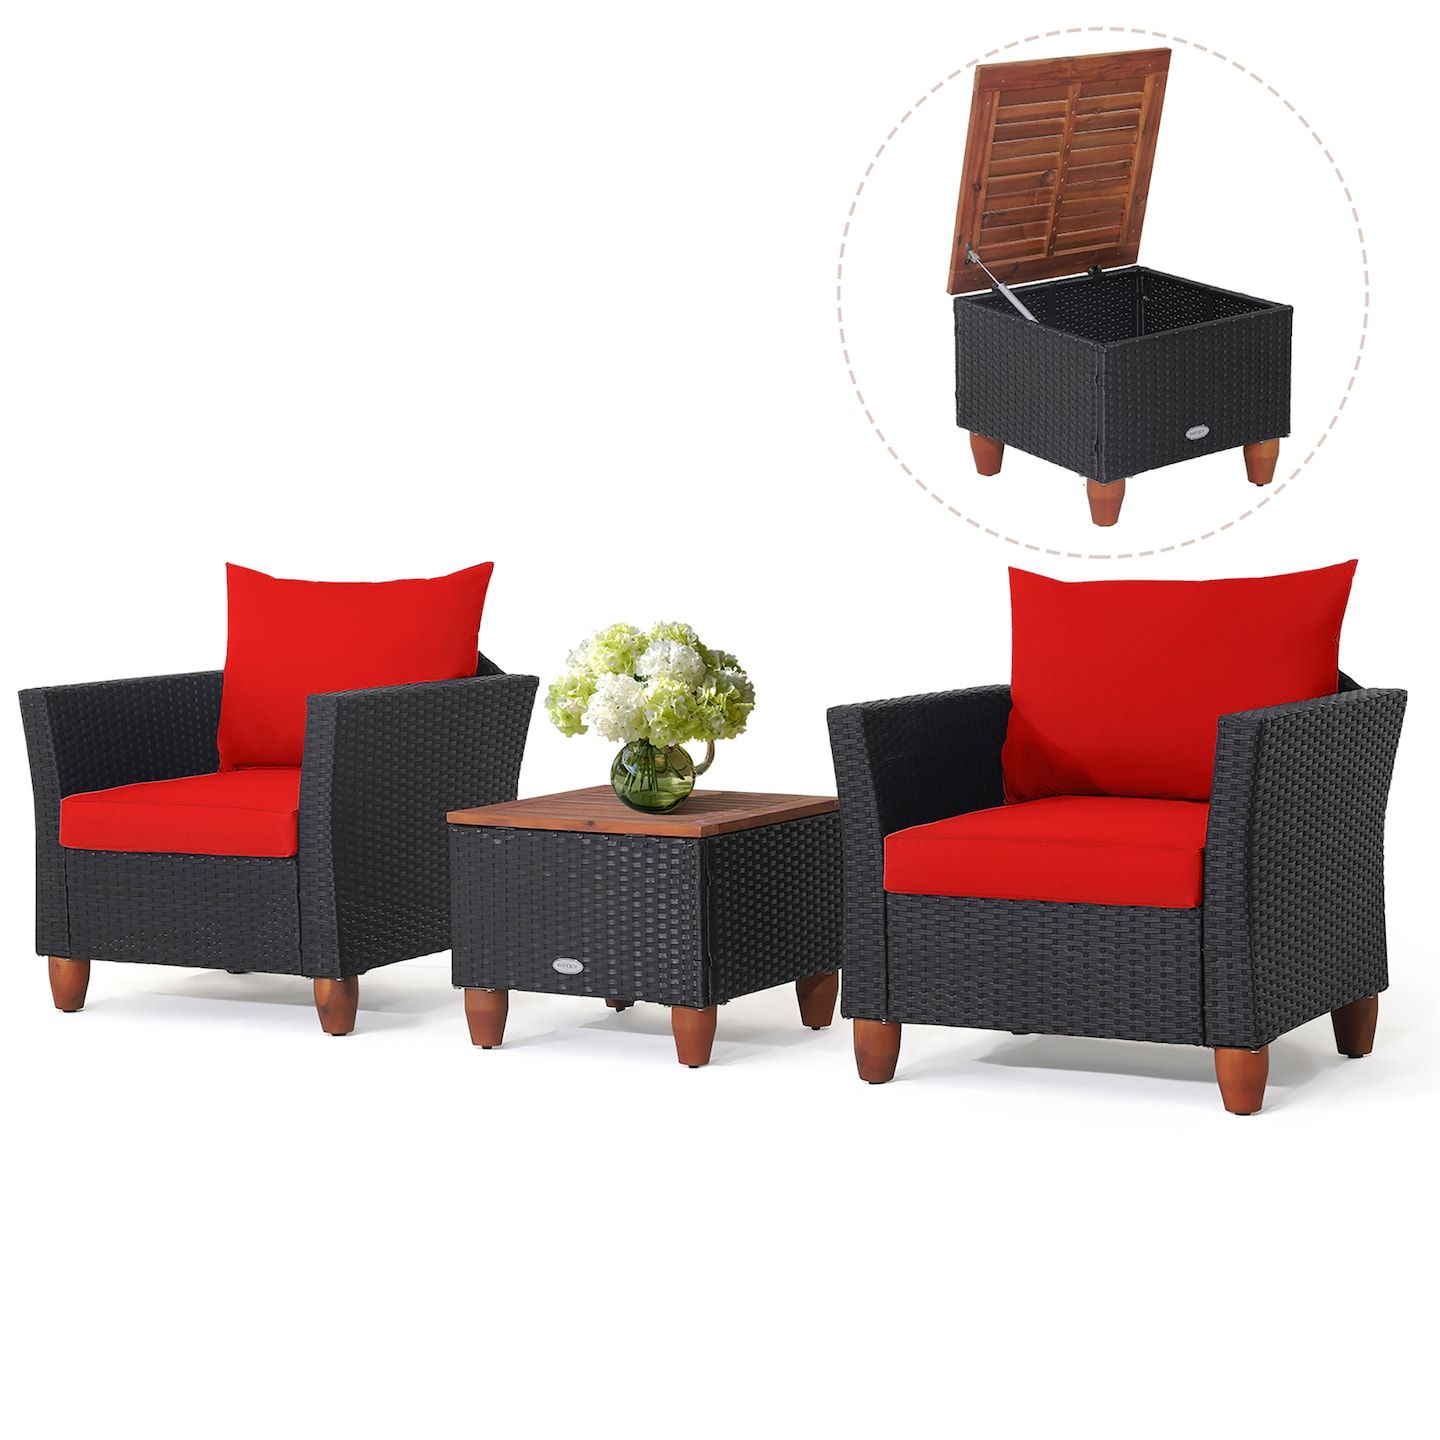 Costway 3pcs Patio Rattan Furniture Set Cushioned Sofa Storage Table With  Wood Top Red/black | Michaels Regarding Furniture Conversation Set Cushioned Sofa Tables (View 11 of 15)